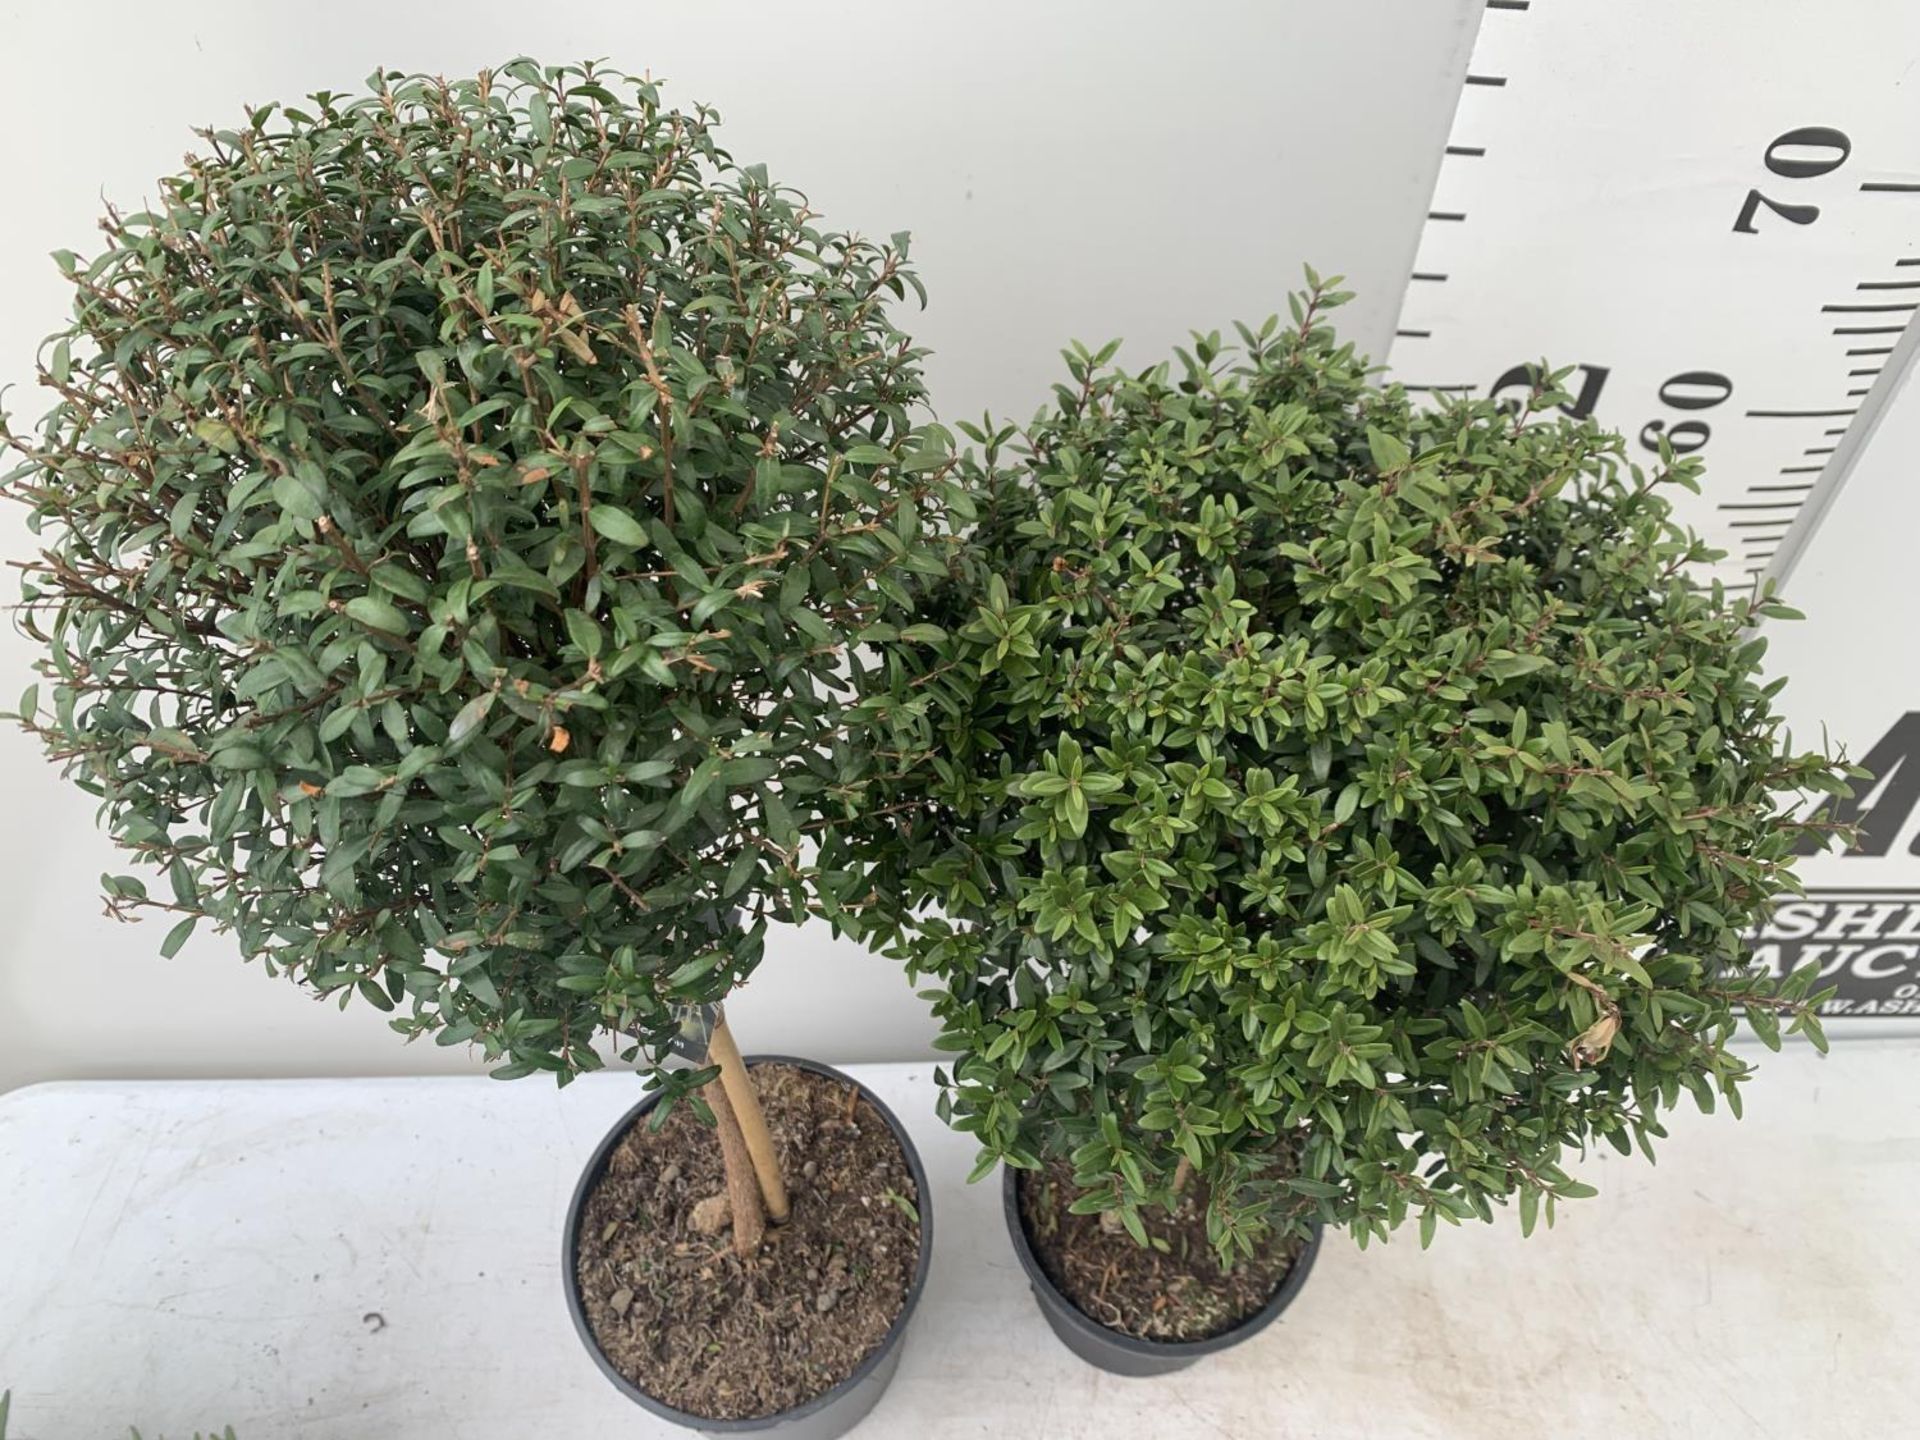 TWO MYRTUS SELECTION STANDARD TREES OF DIFFERING HEIGHTS ONE APPROX 85CM IN HEIGHT AND ONE 70CM IN 2 - Image 6 of 10